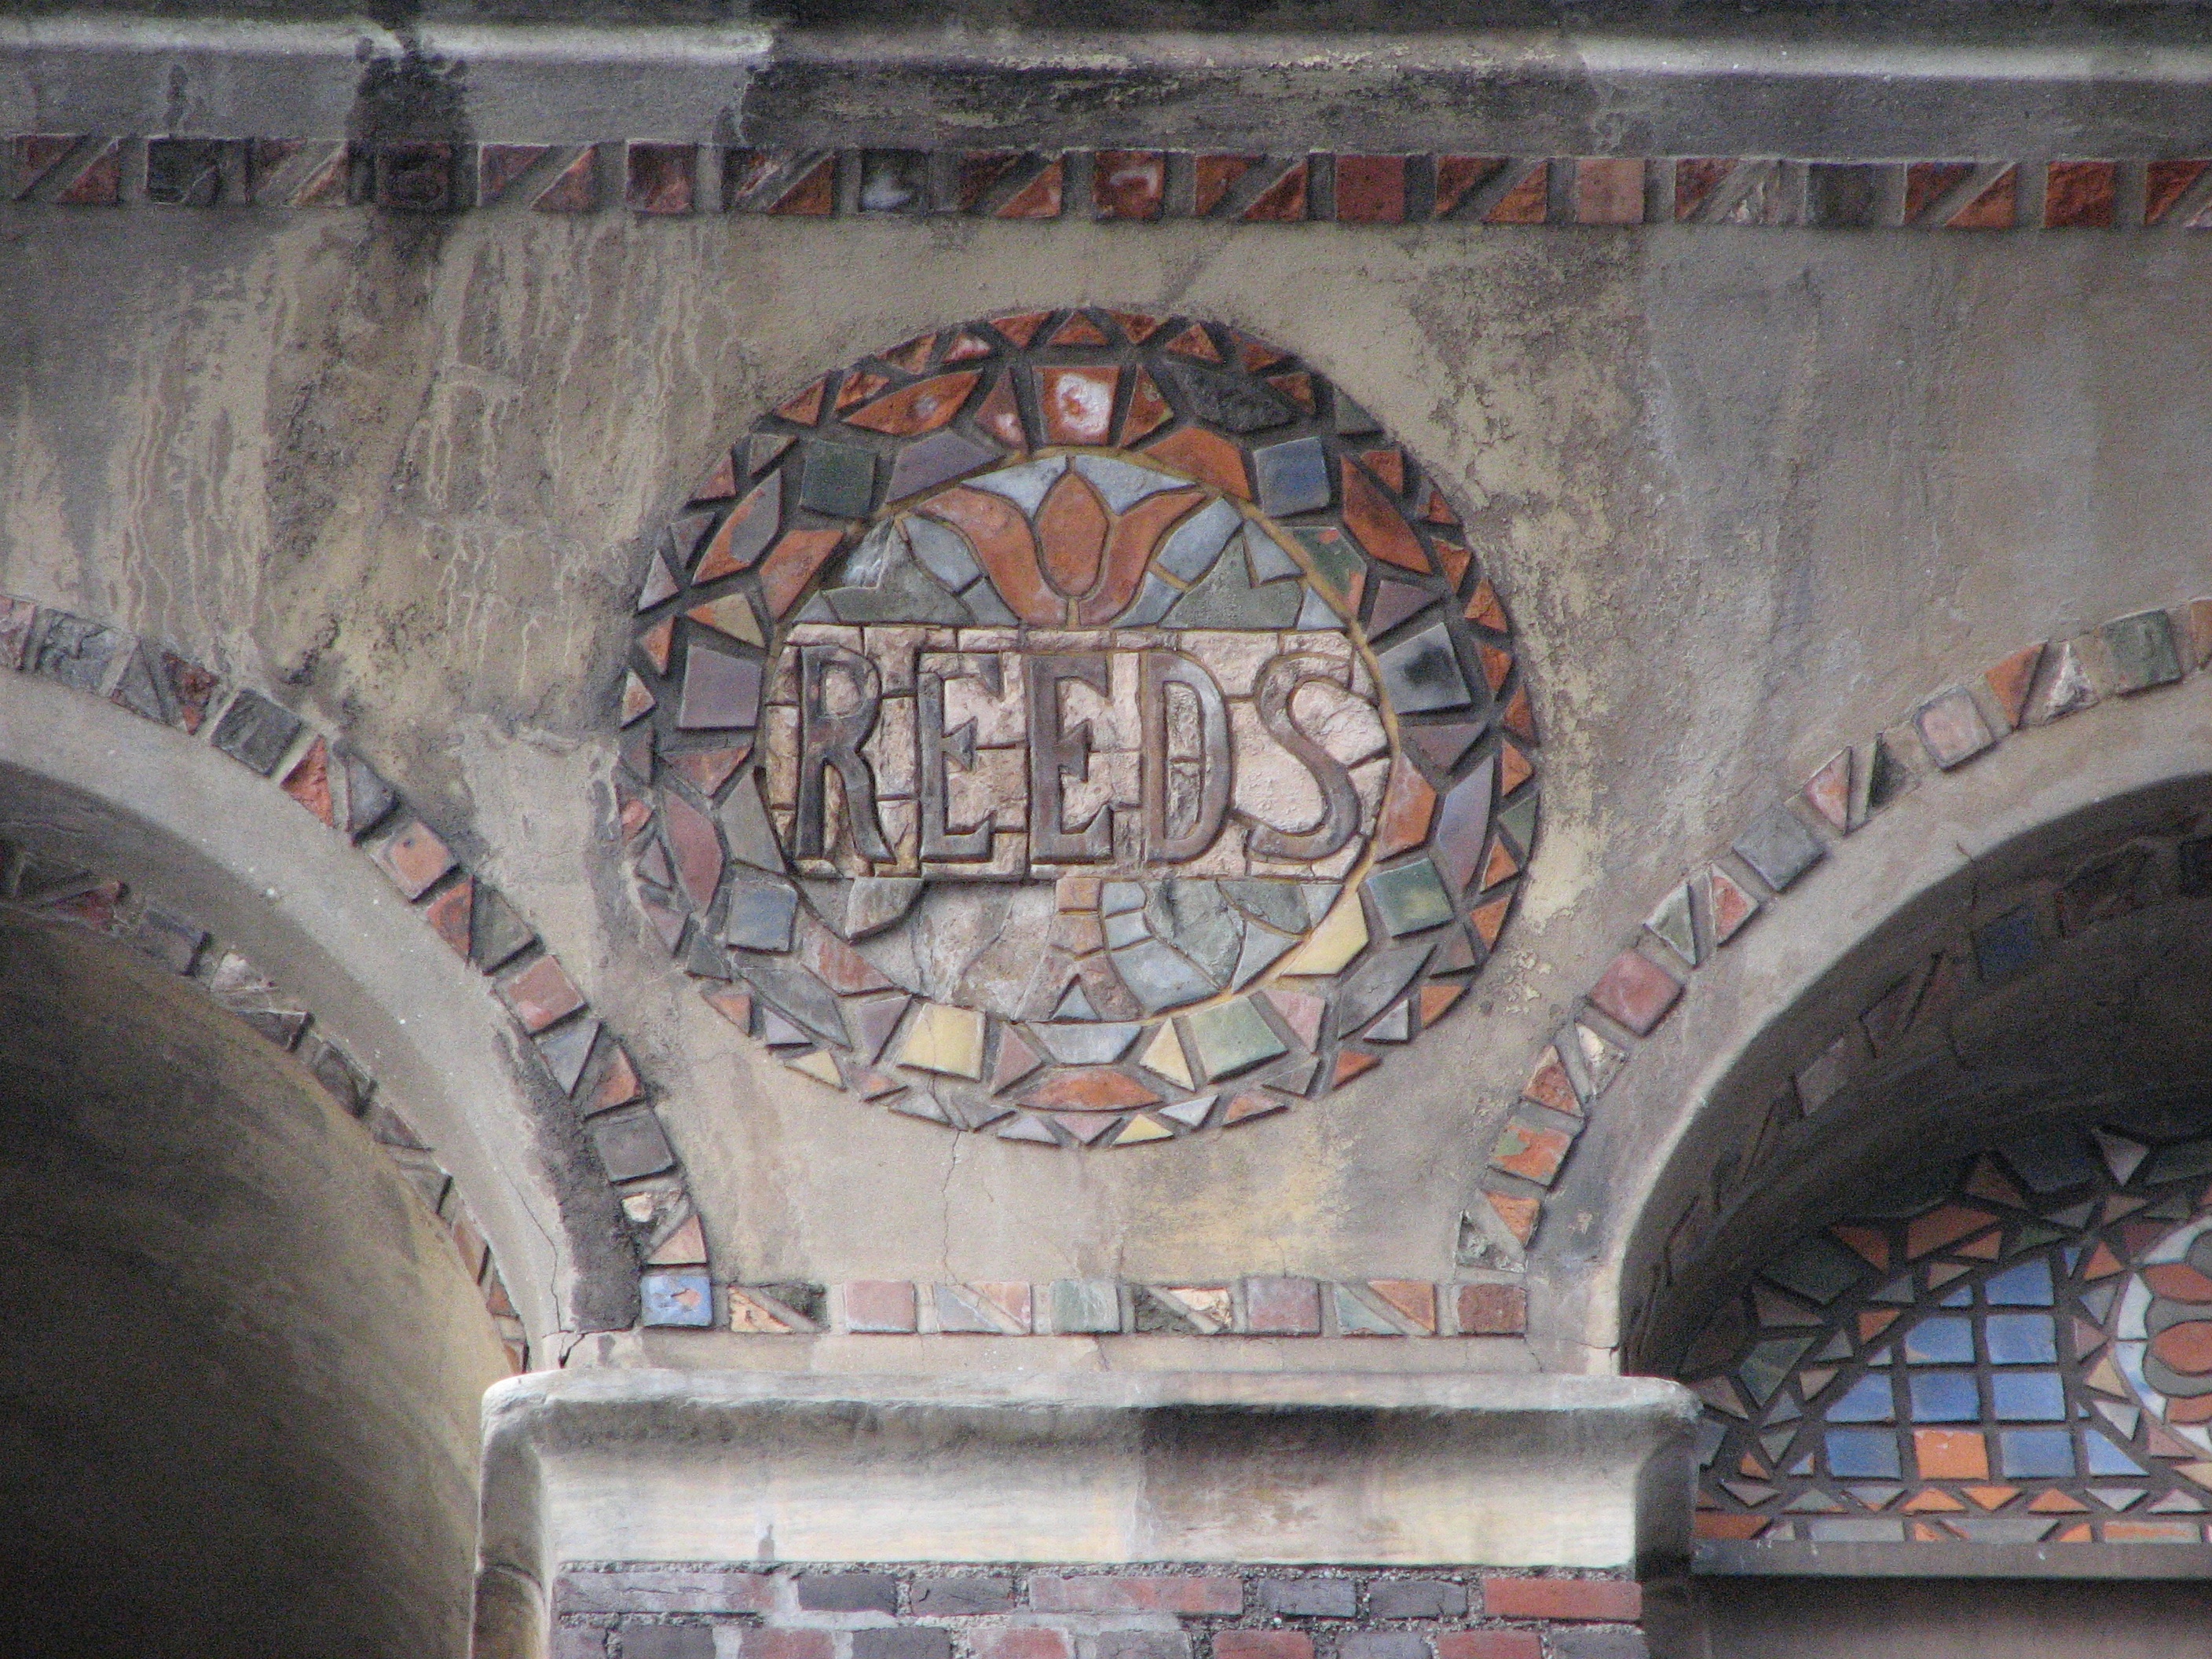 The Reeds name is spelled in handmade tiles at the top of the building.